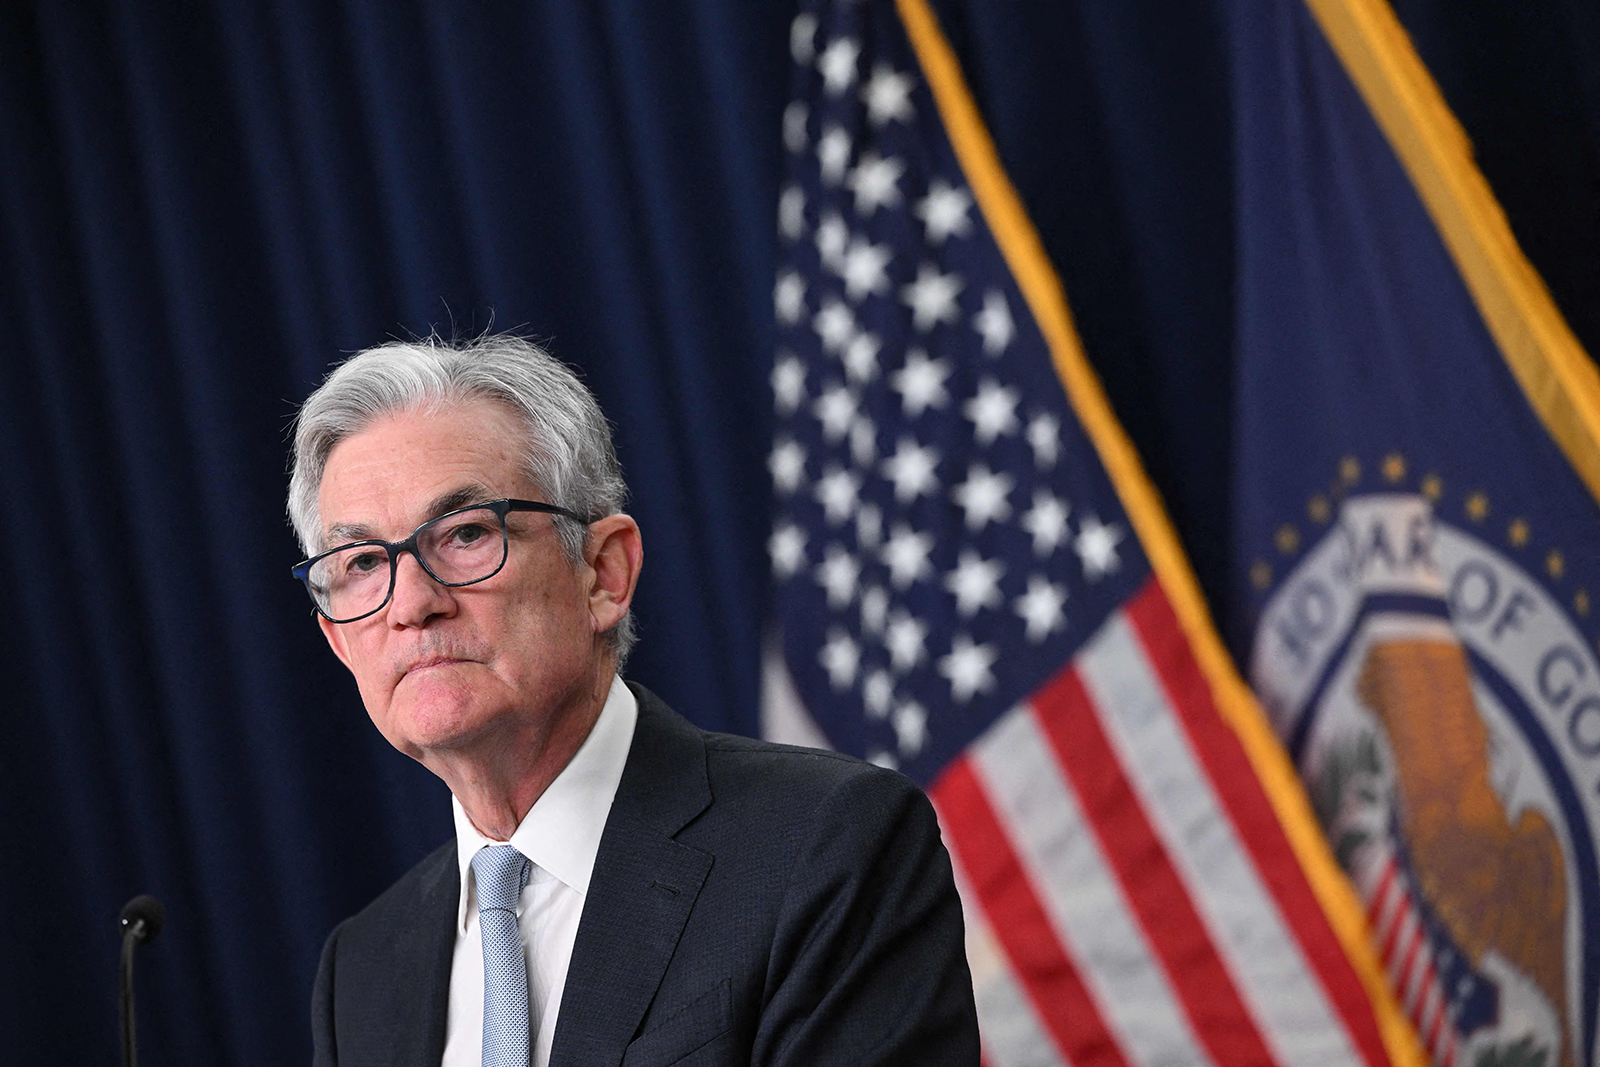 Federal Reserve Board Chairman Jerome Powell speaking today during a news conference following a Federal Open Market Committee meeting, at the Federal Reserve Board Building in Washington, DC.